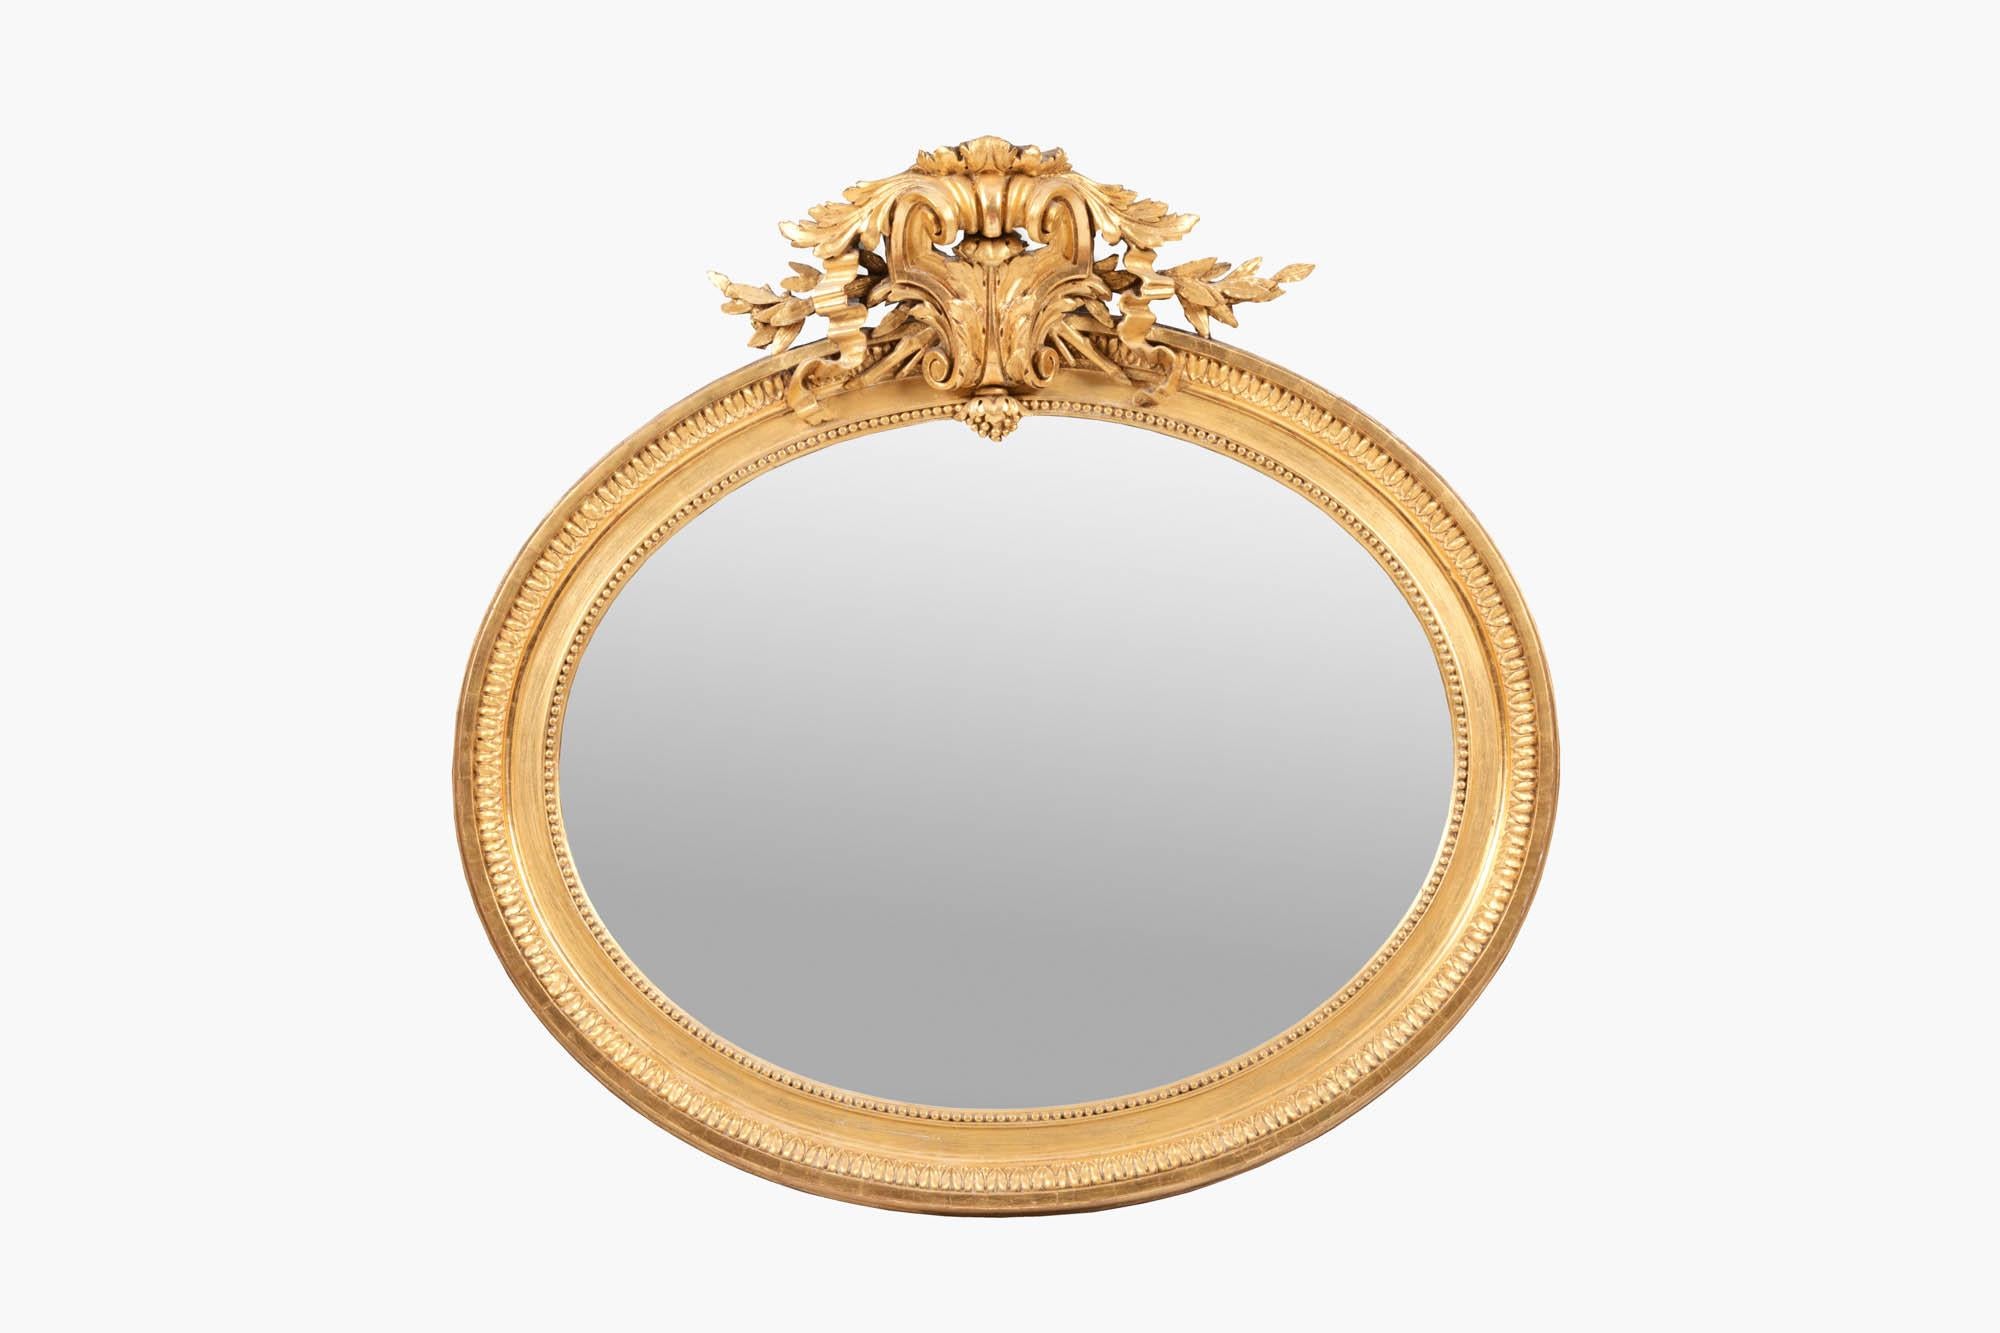 19th Century oval gilt mirror. The frame is carved with an egg and dart design alternating with convex fillets and an inner gilded beaded loop. At the top, the frame is decorated by a large cartouche featuring acanthus leaves and ribbon scrolling.